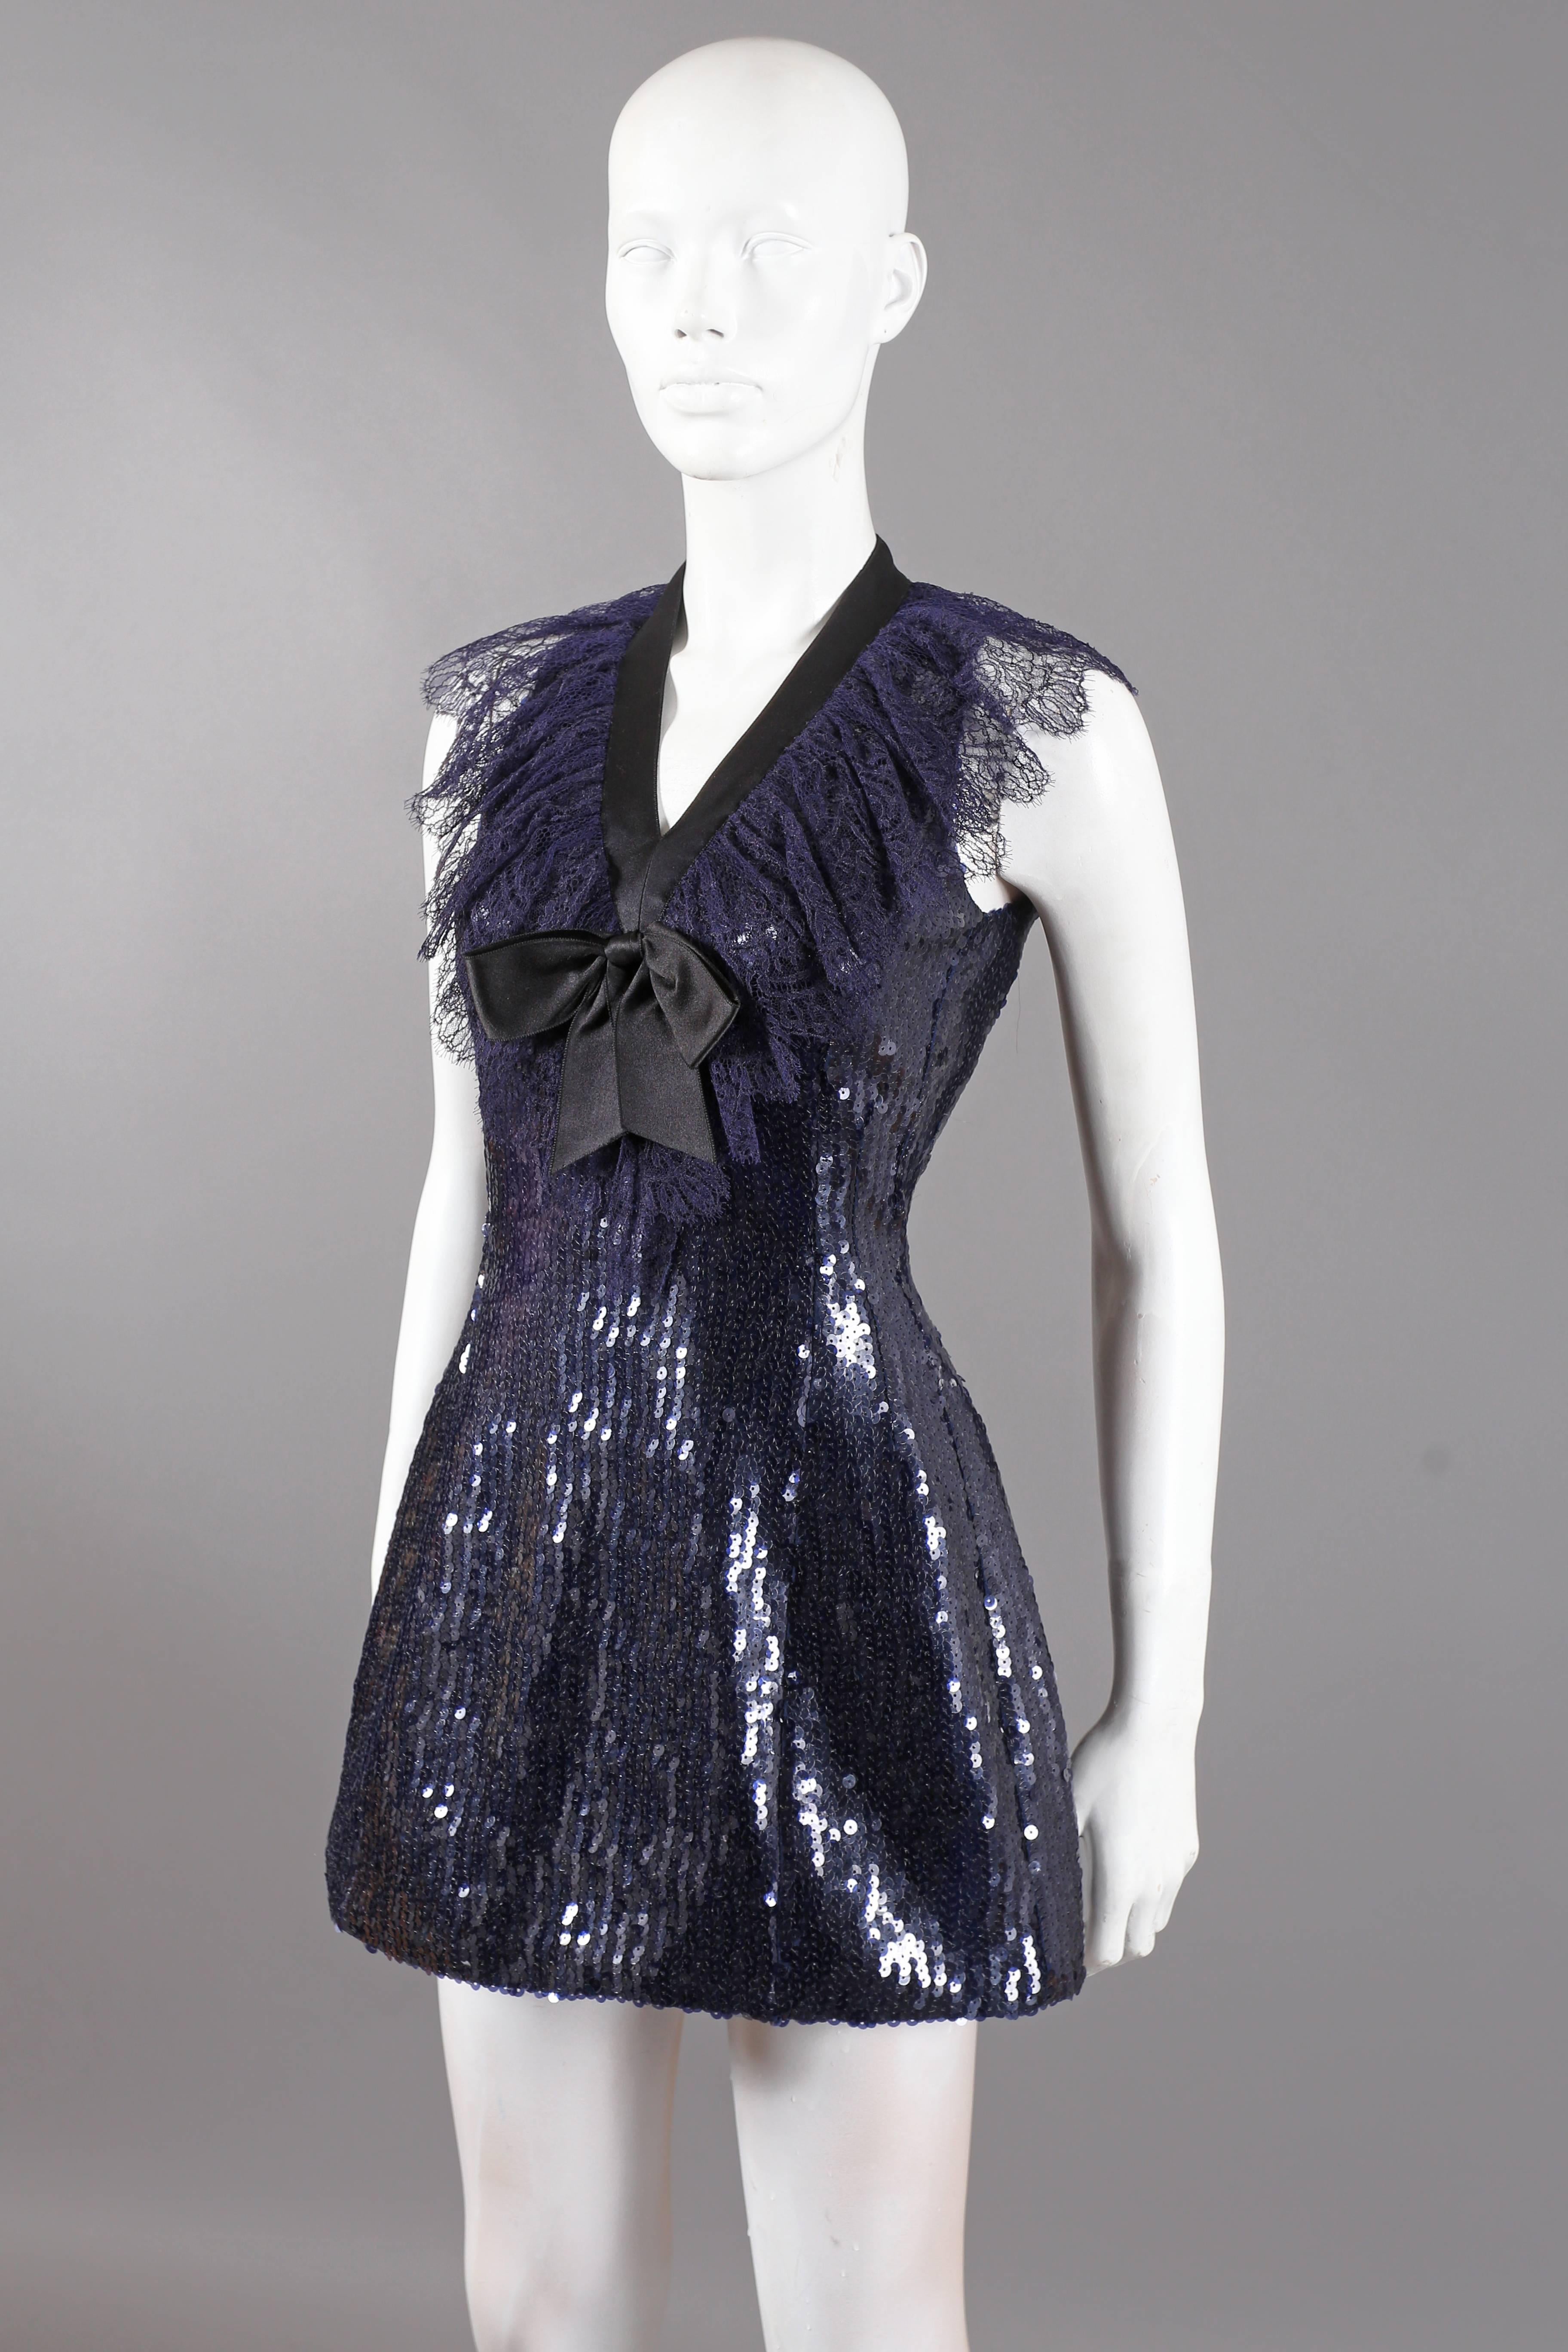 Chanel navy blue sequinned mini dress with lace collar and satin bow, C. 1987 2